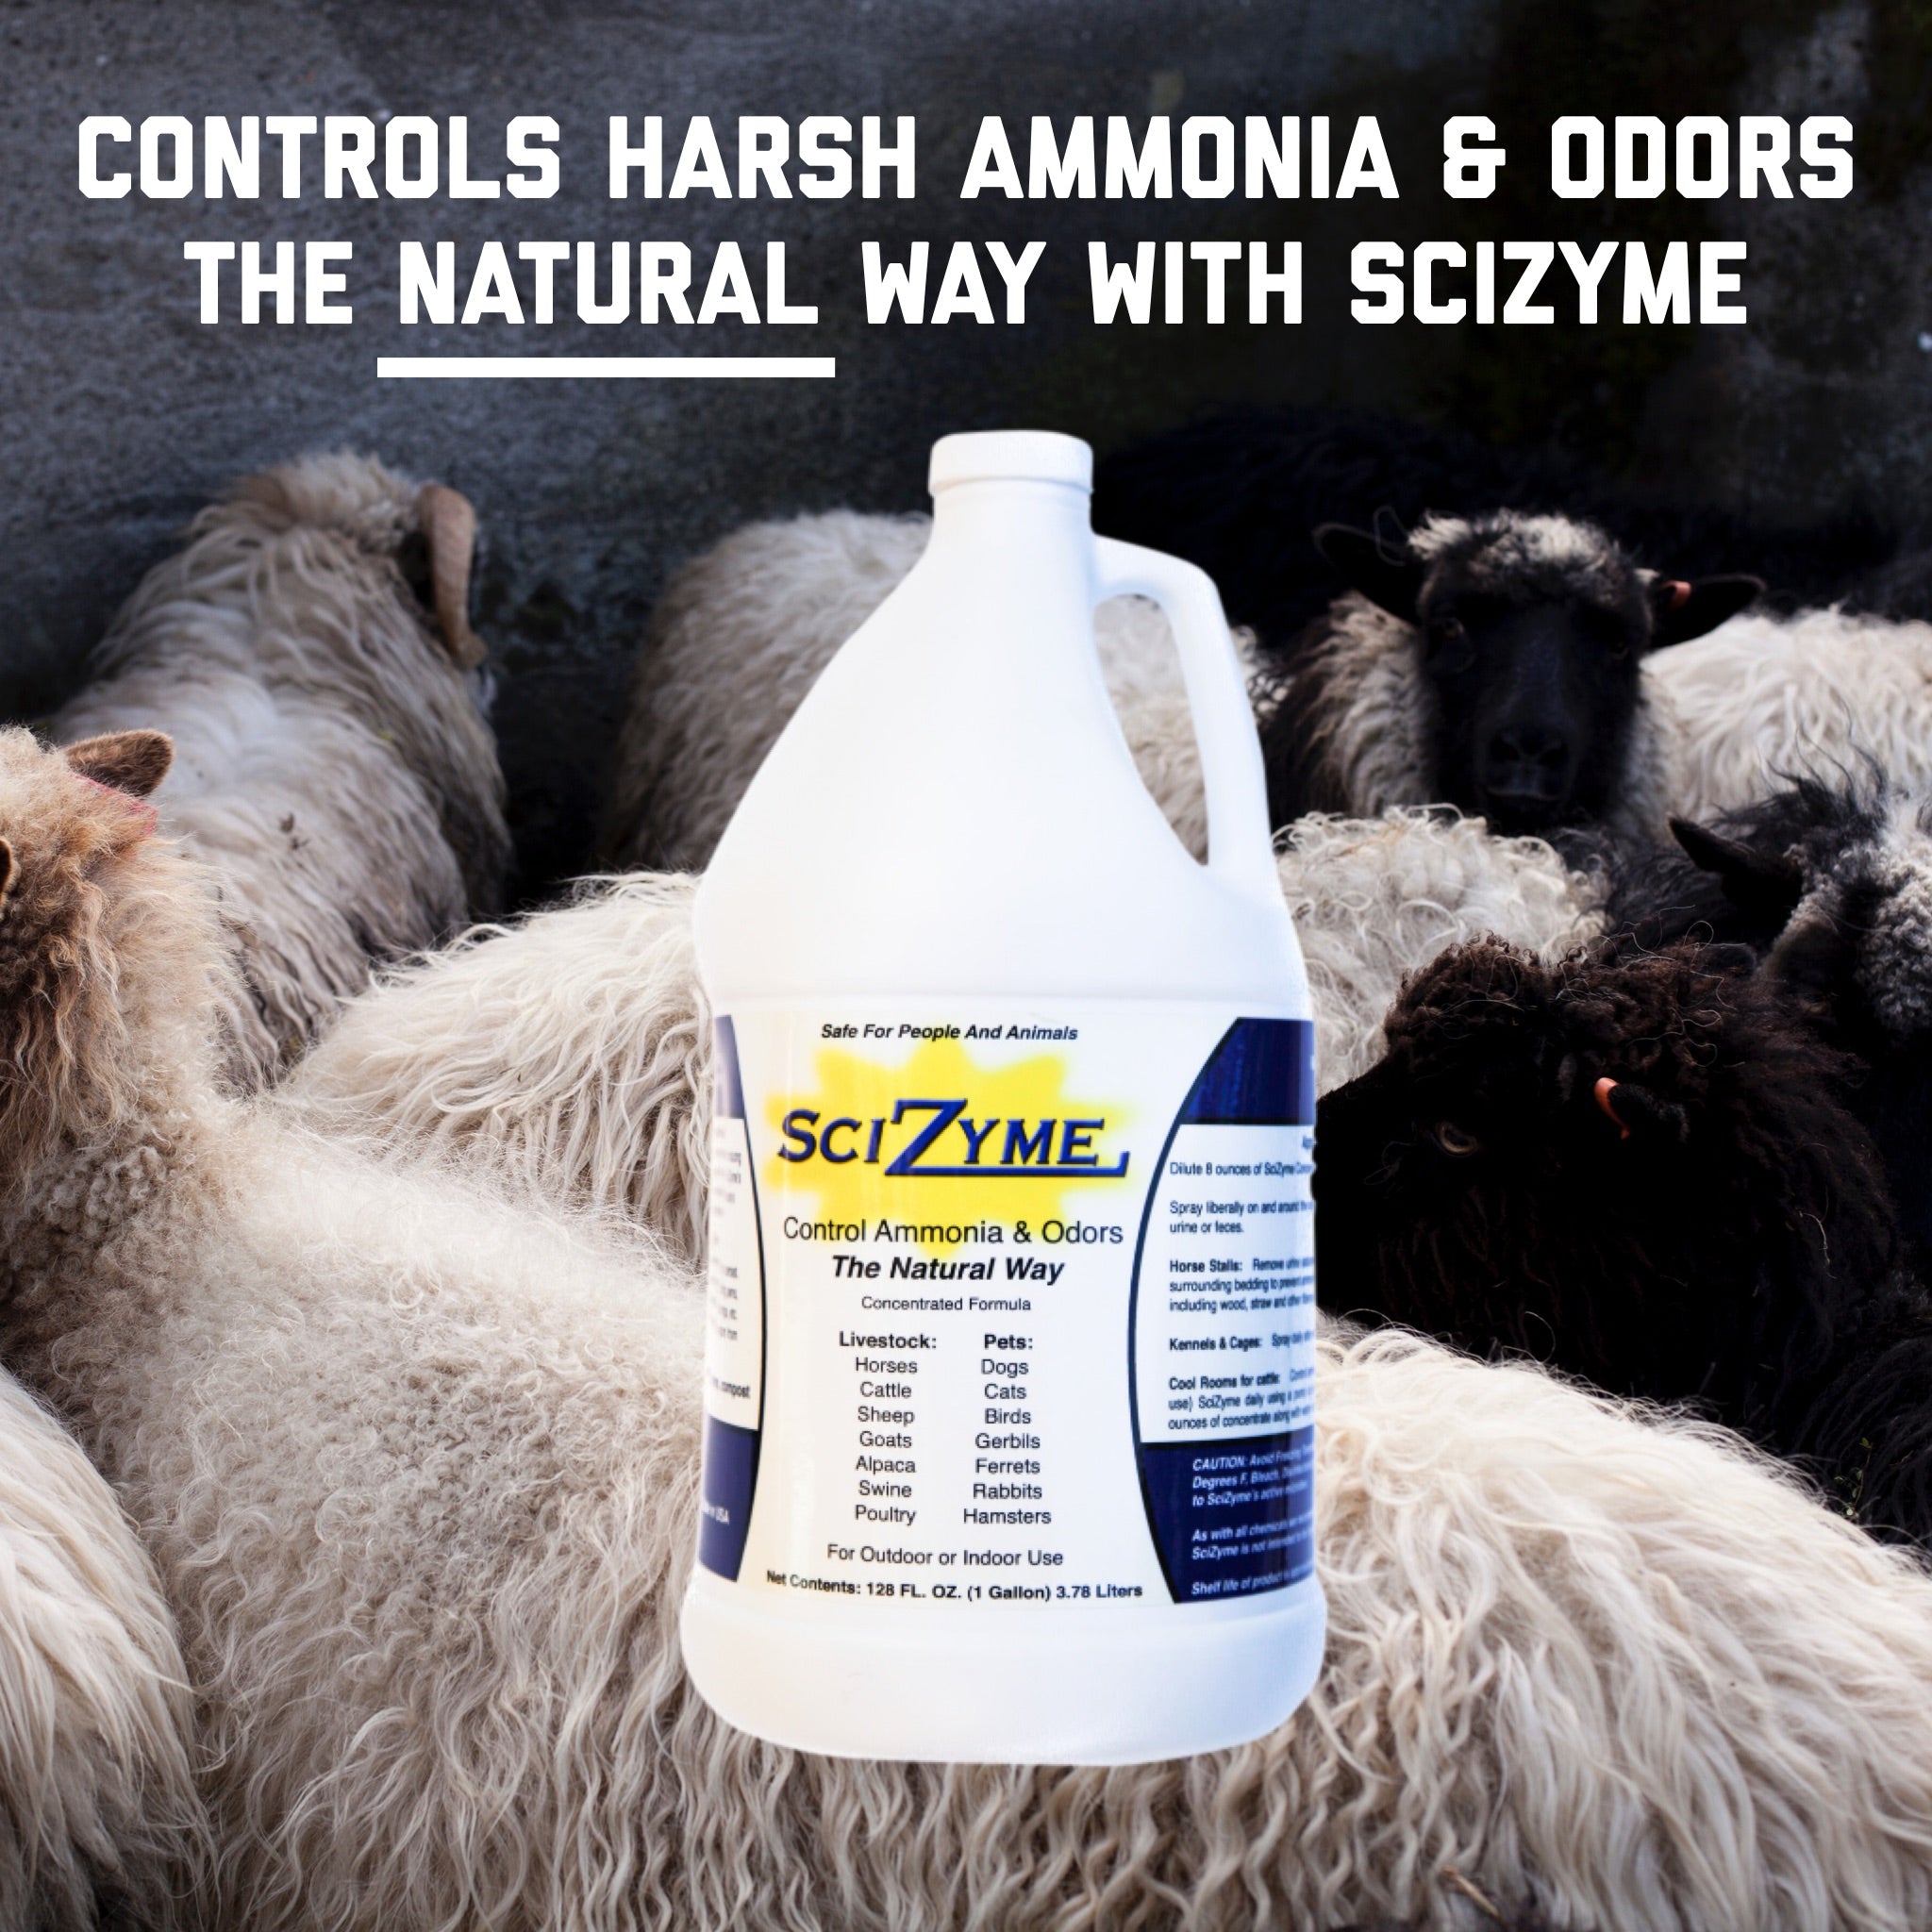 SciZyme - Fresh 500 Concentrate - Enzyme Based Eliminator & Control Odors & Ammonia in Cooler Rooms, Barns, Trailers, Kennels, Concrete.